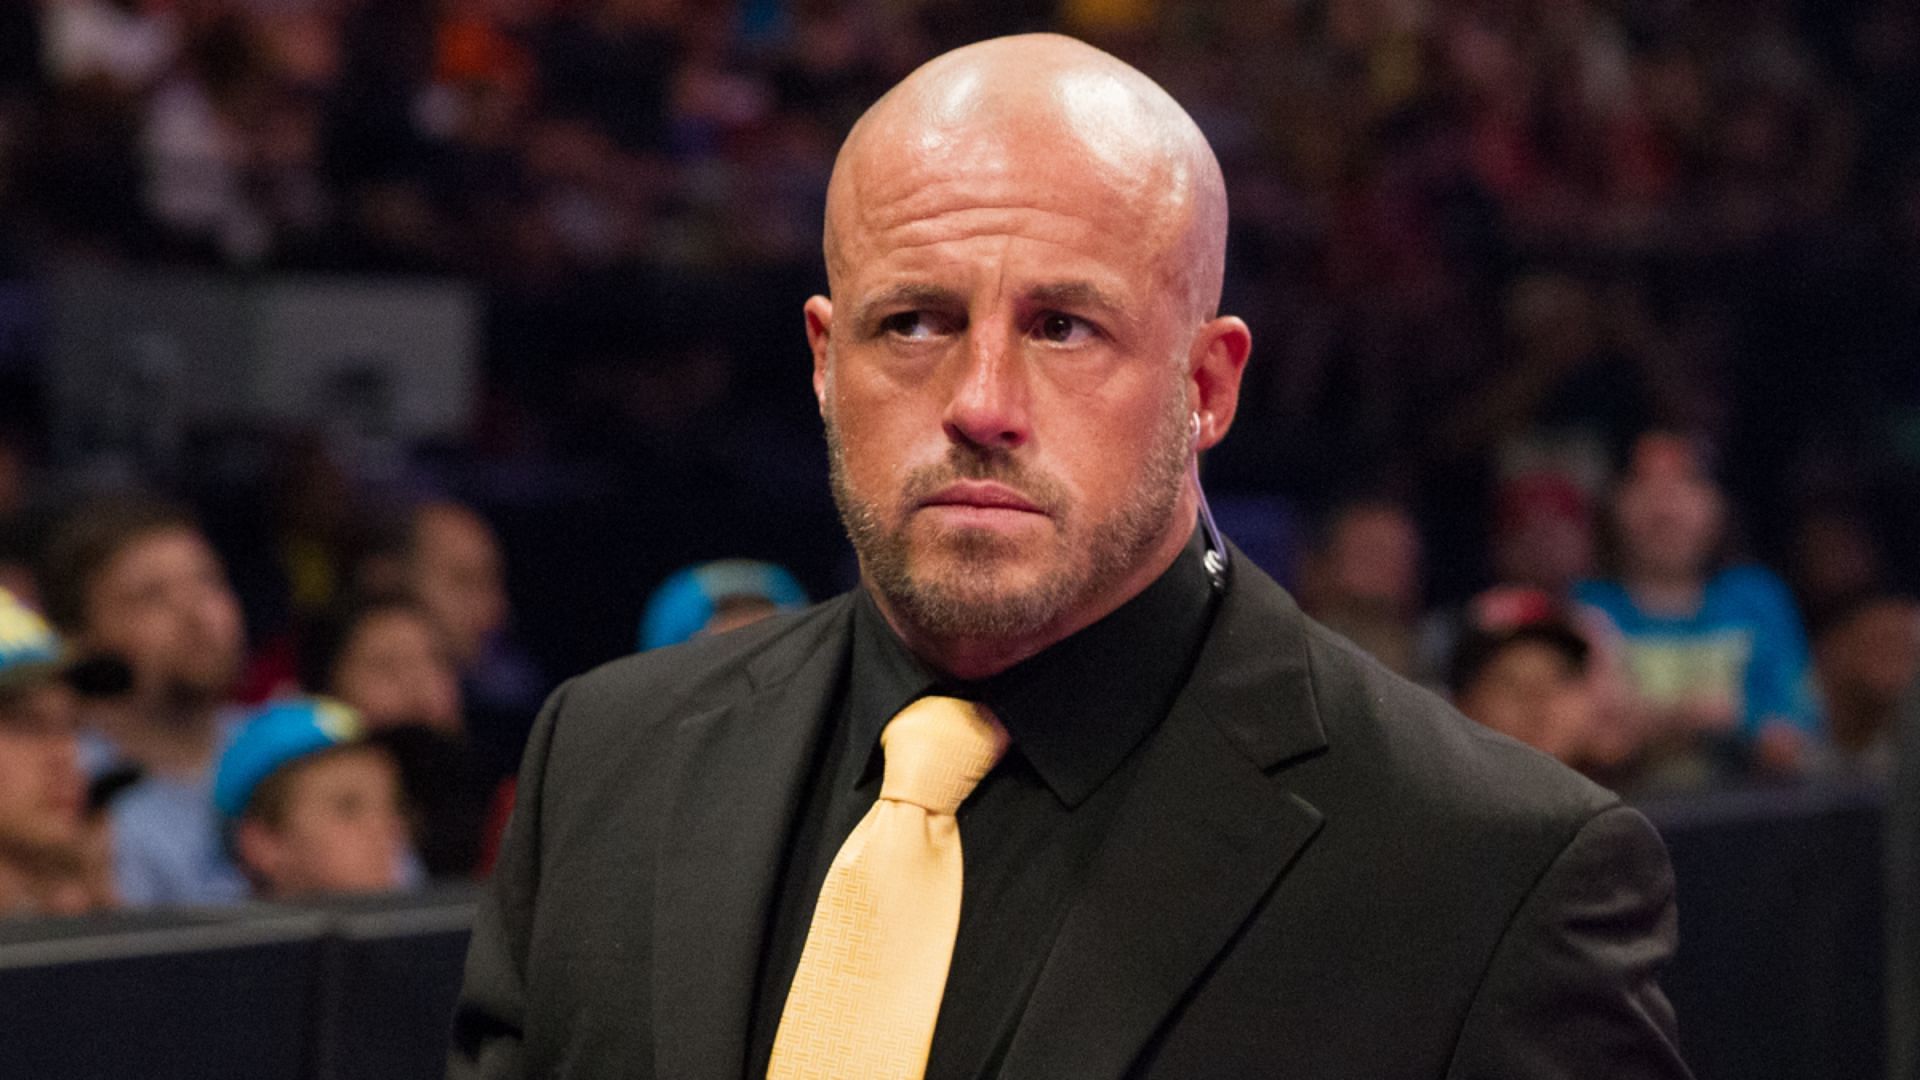 Joey Mercury as part of J&amp;J security after returning to WWE